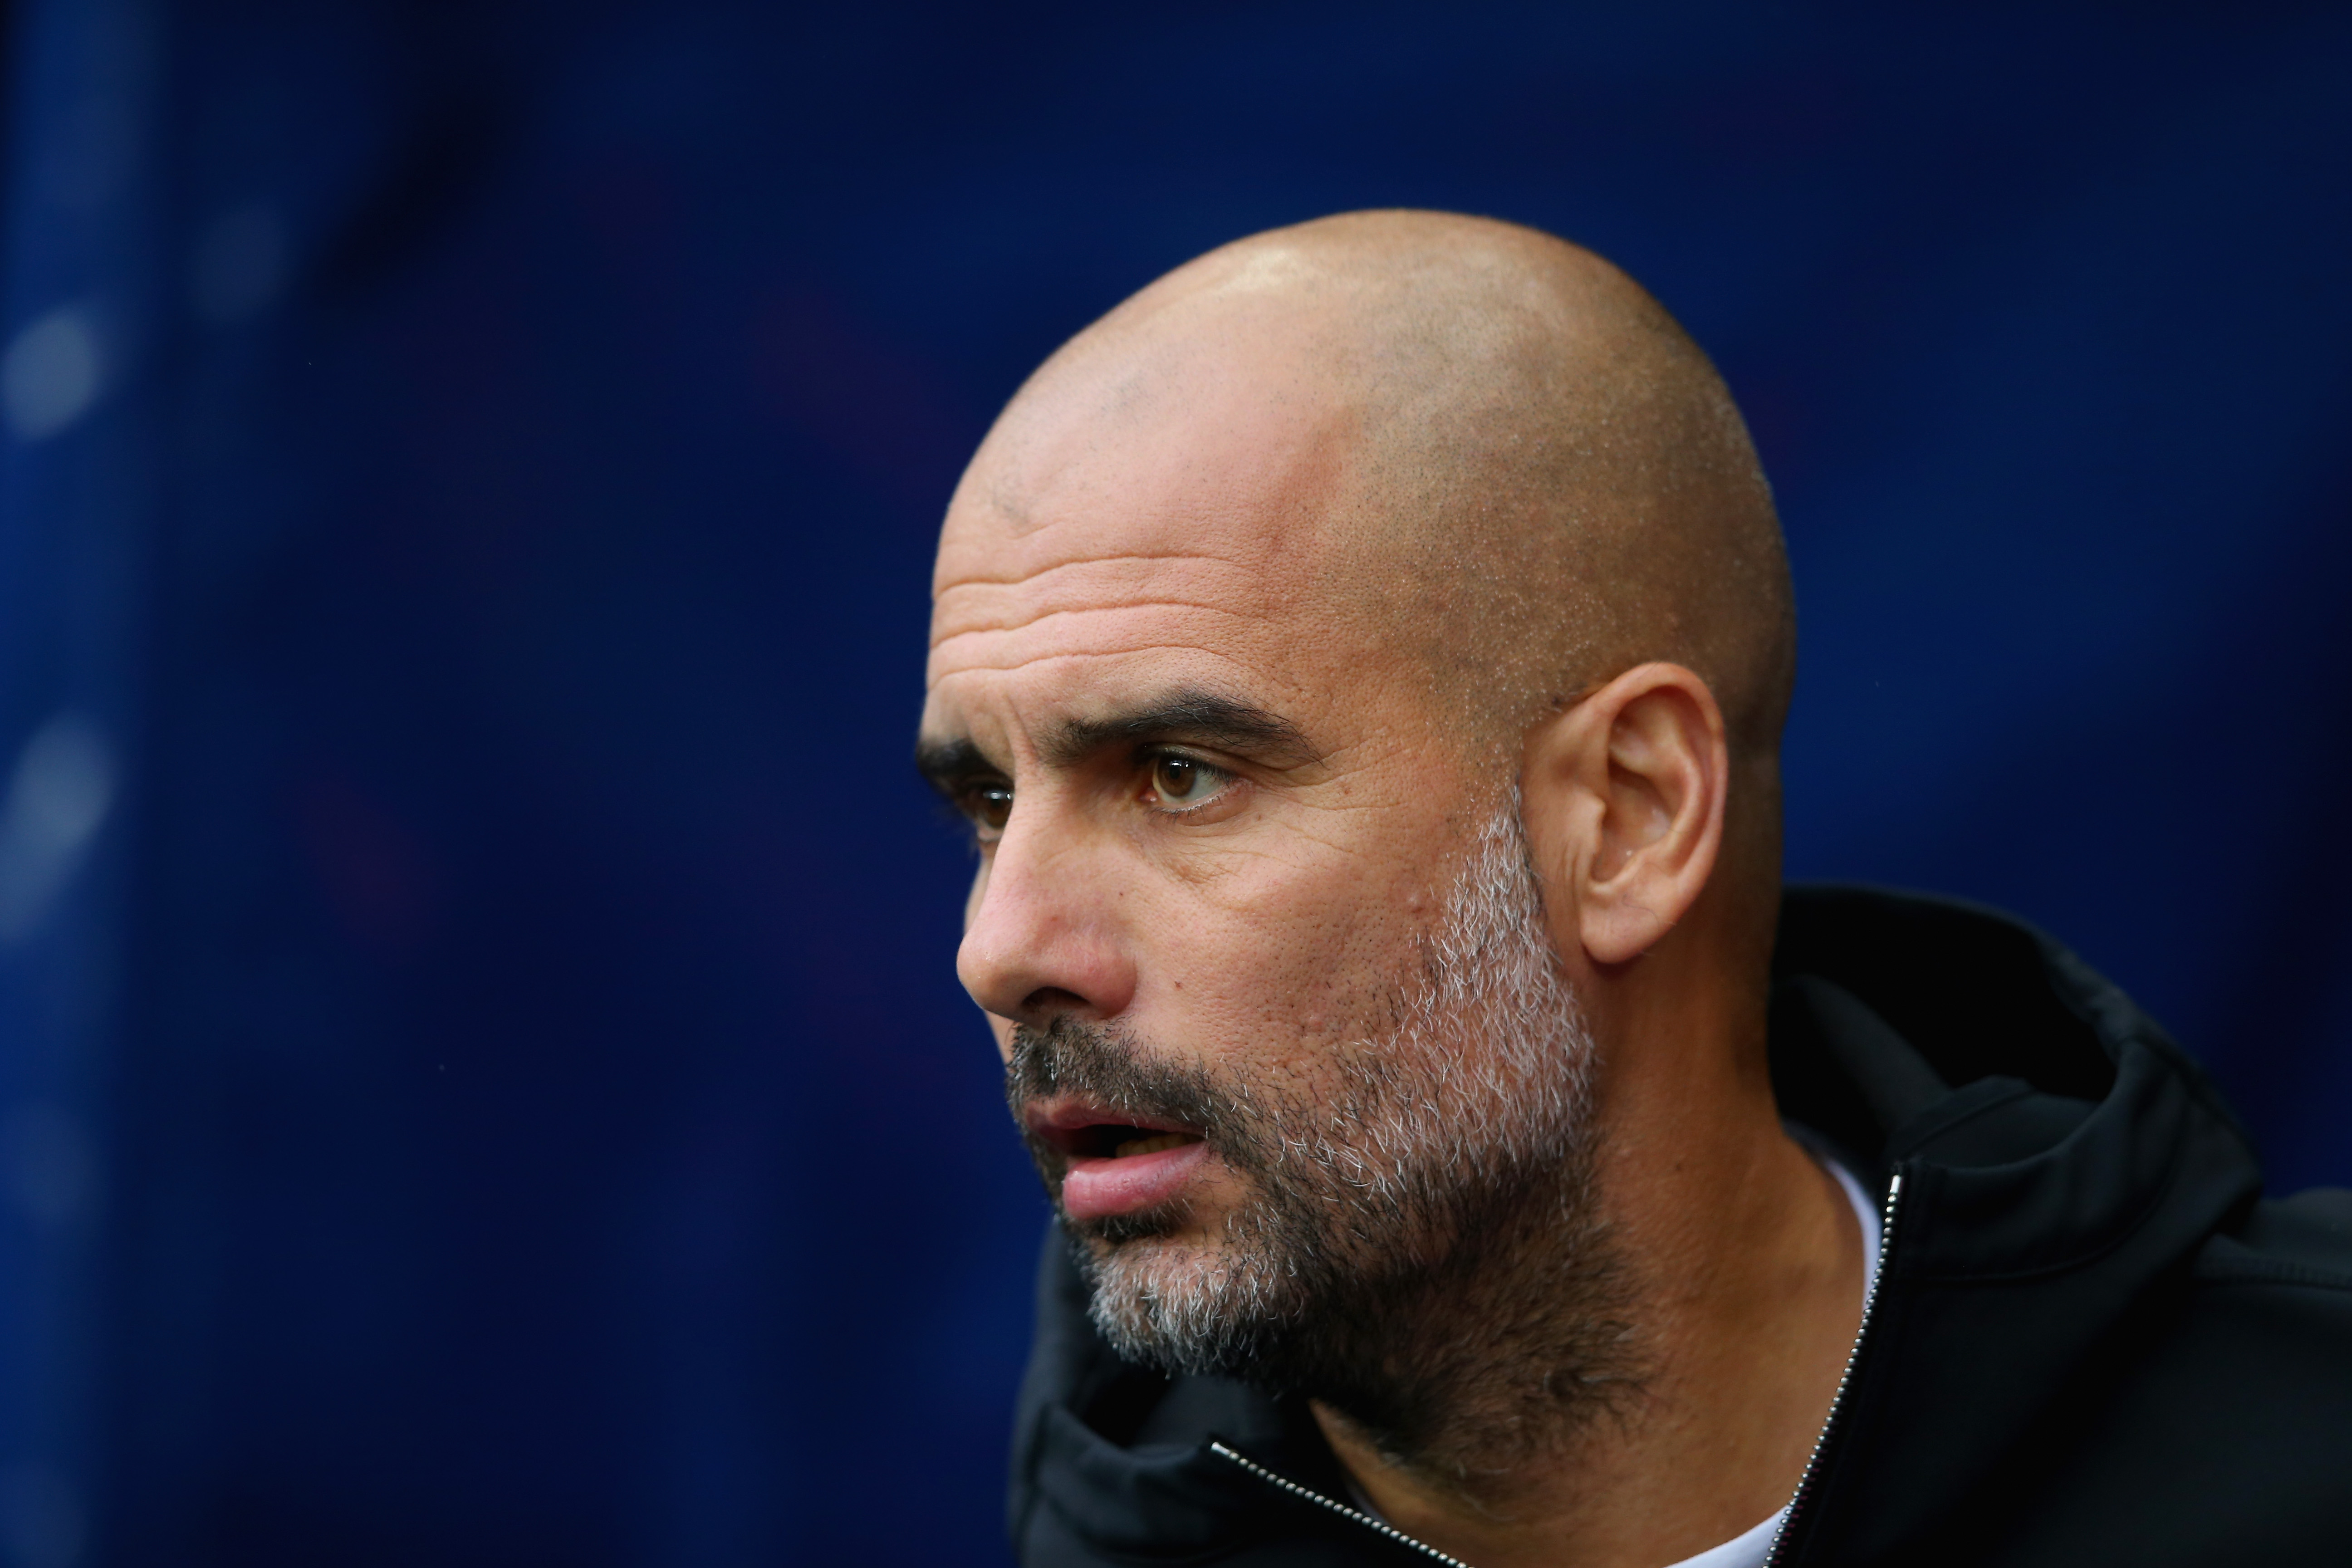 MANCHESTER, ENGLAND - OCTOBER 21:  Josep Guardiola, Manager of Manchester City looks on prior to the Premier League match between Manchester City and Burnley at Etihad Stadium on October 21, 2017 in Manchester, England.  (Photo by Alex Livesey/Getty Images)